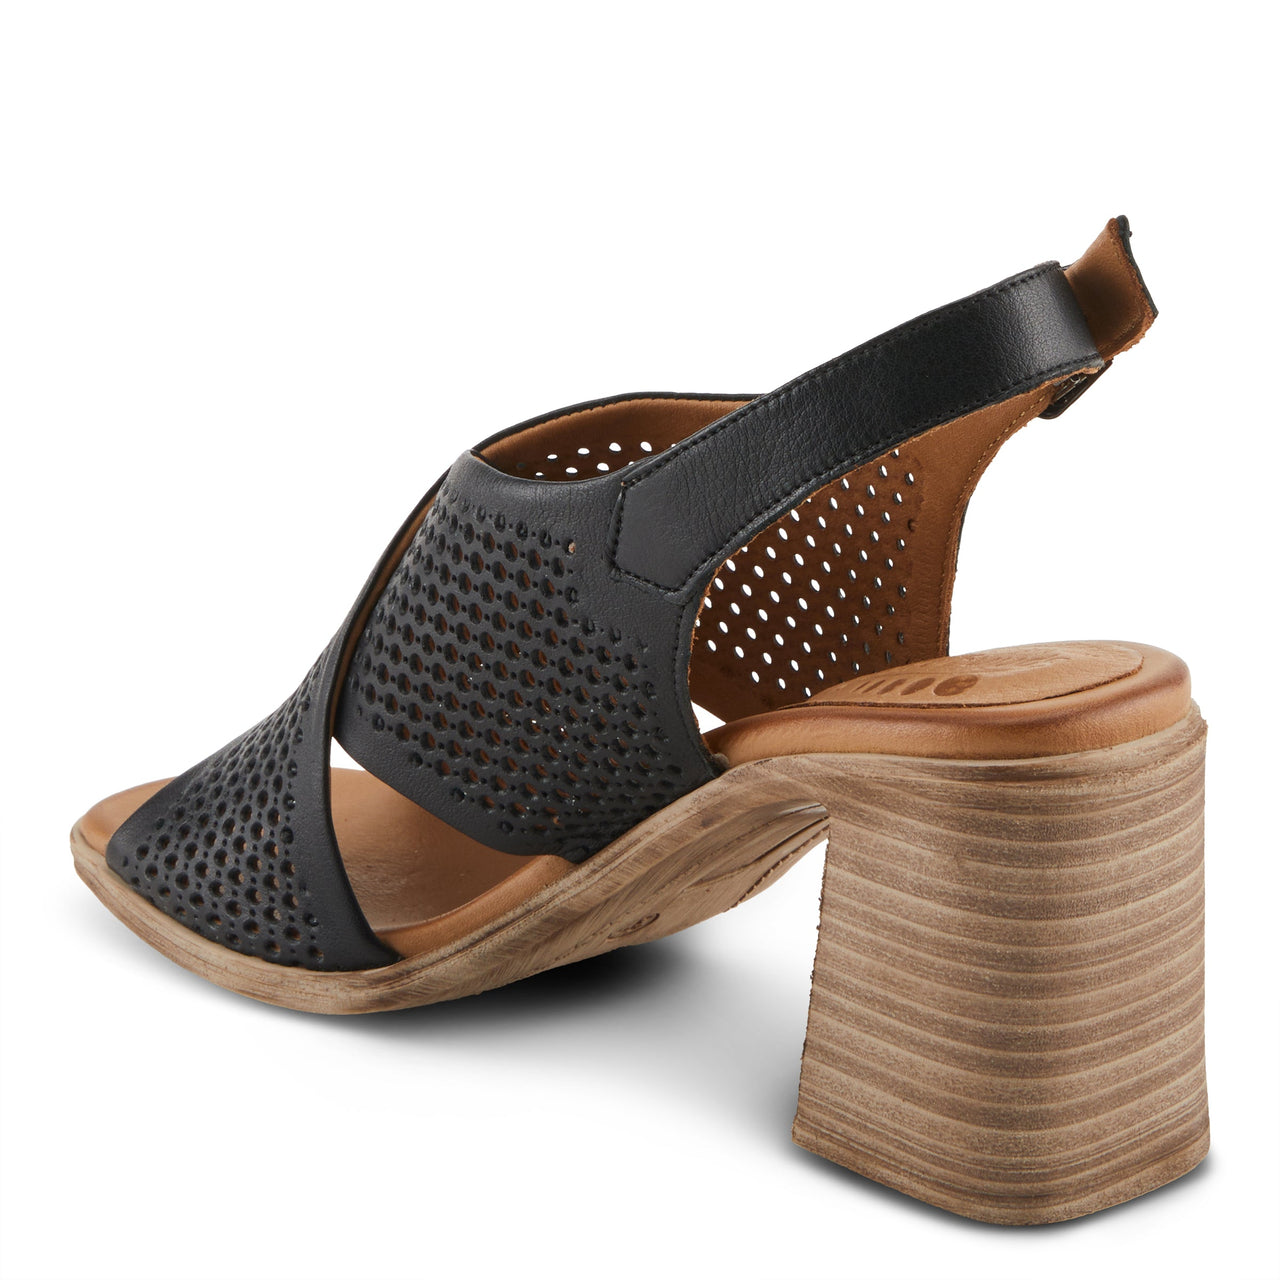 Beautiful and stylish Spring Step Luanca Sandals in black, perfect for summer outings and casual wear